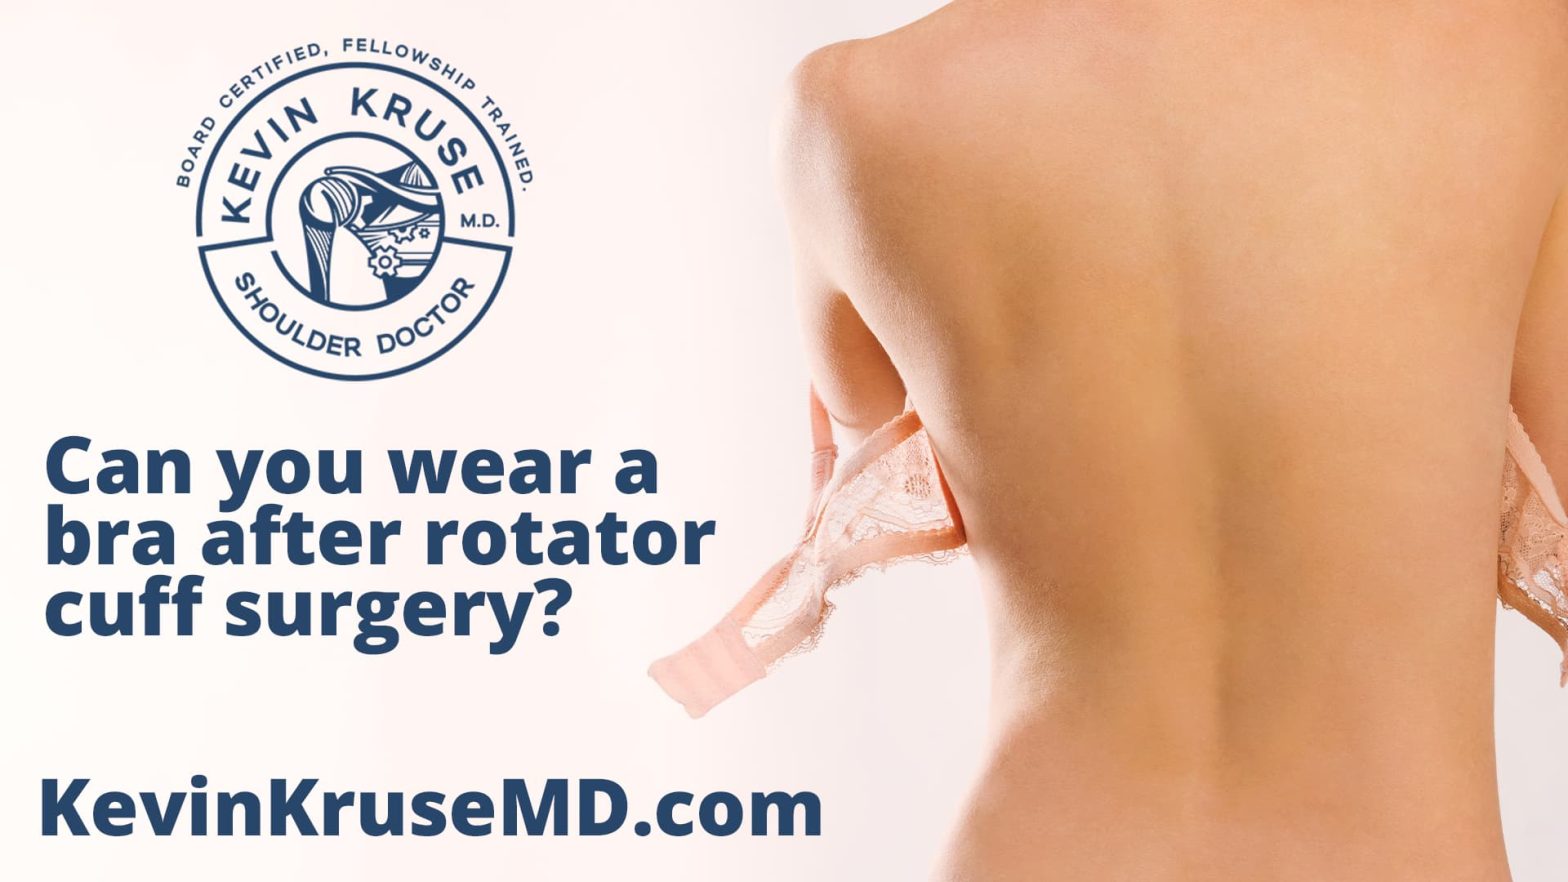 Can you wear a bra after rotator cuff surgery? - Dr. Kevin Kruse